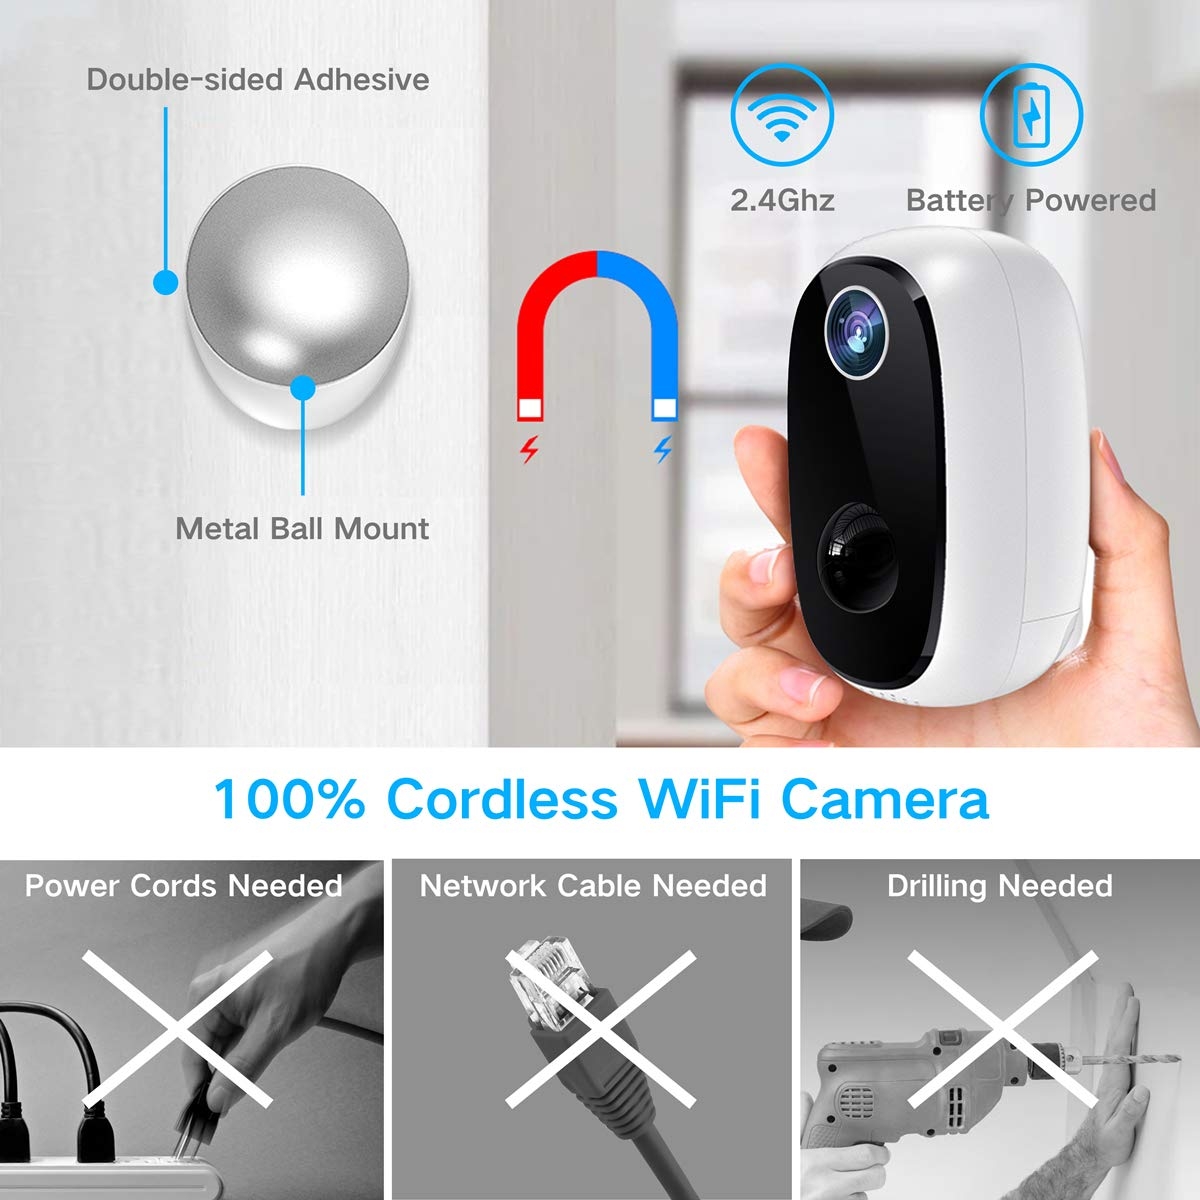 Wireless Outdoor Security Camera, MECO 1080P Rechargeable Battery WiFi Camera, Indoor/Outdoor Surveillance Home Camera with Motion Detection, Night Vision, 2-Way Audio, Waterproof, Cloud/Micro SD Card